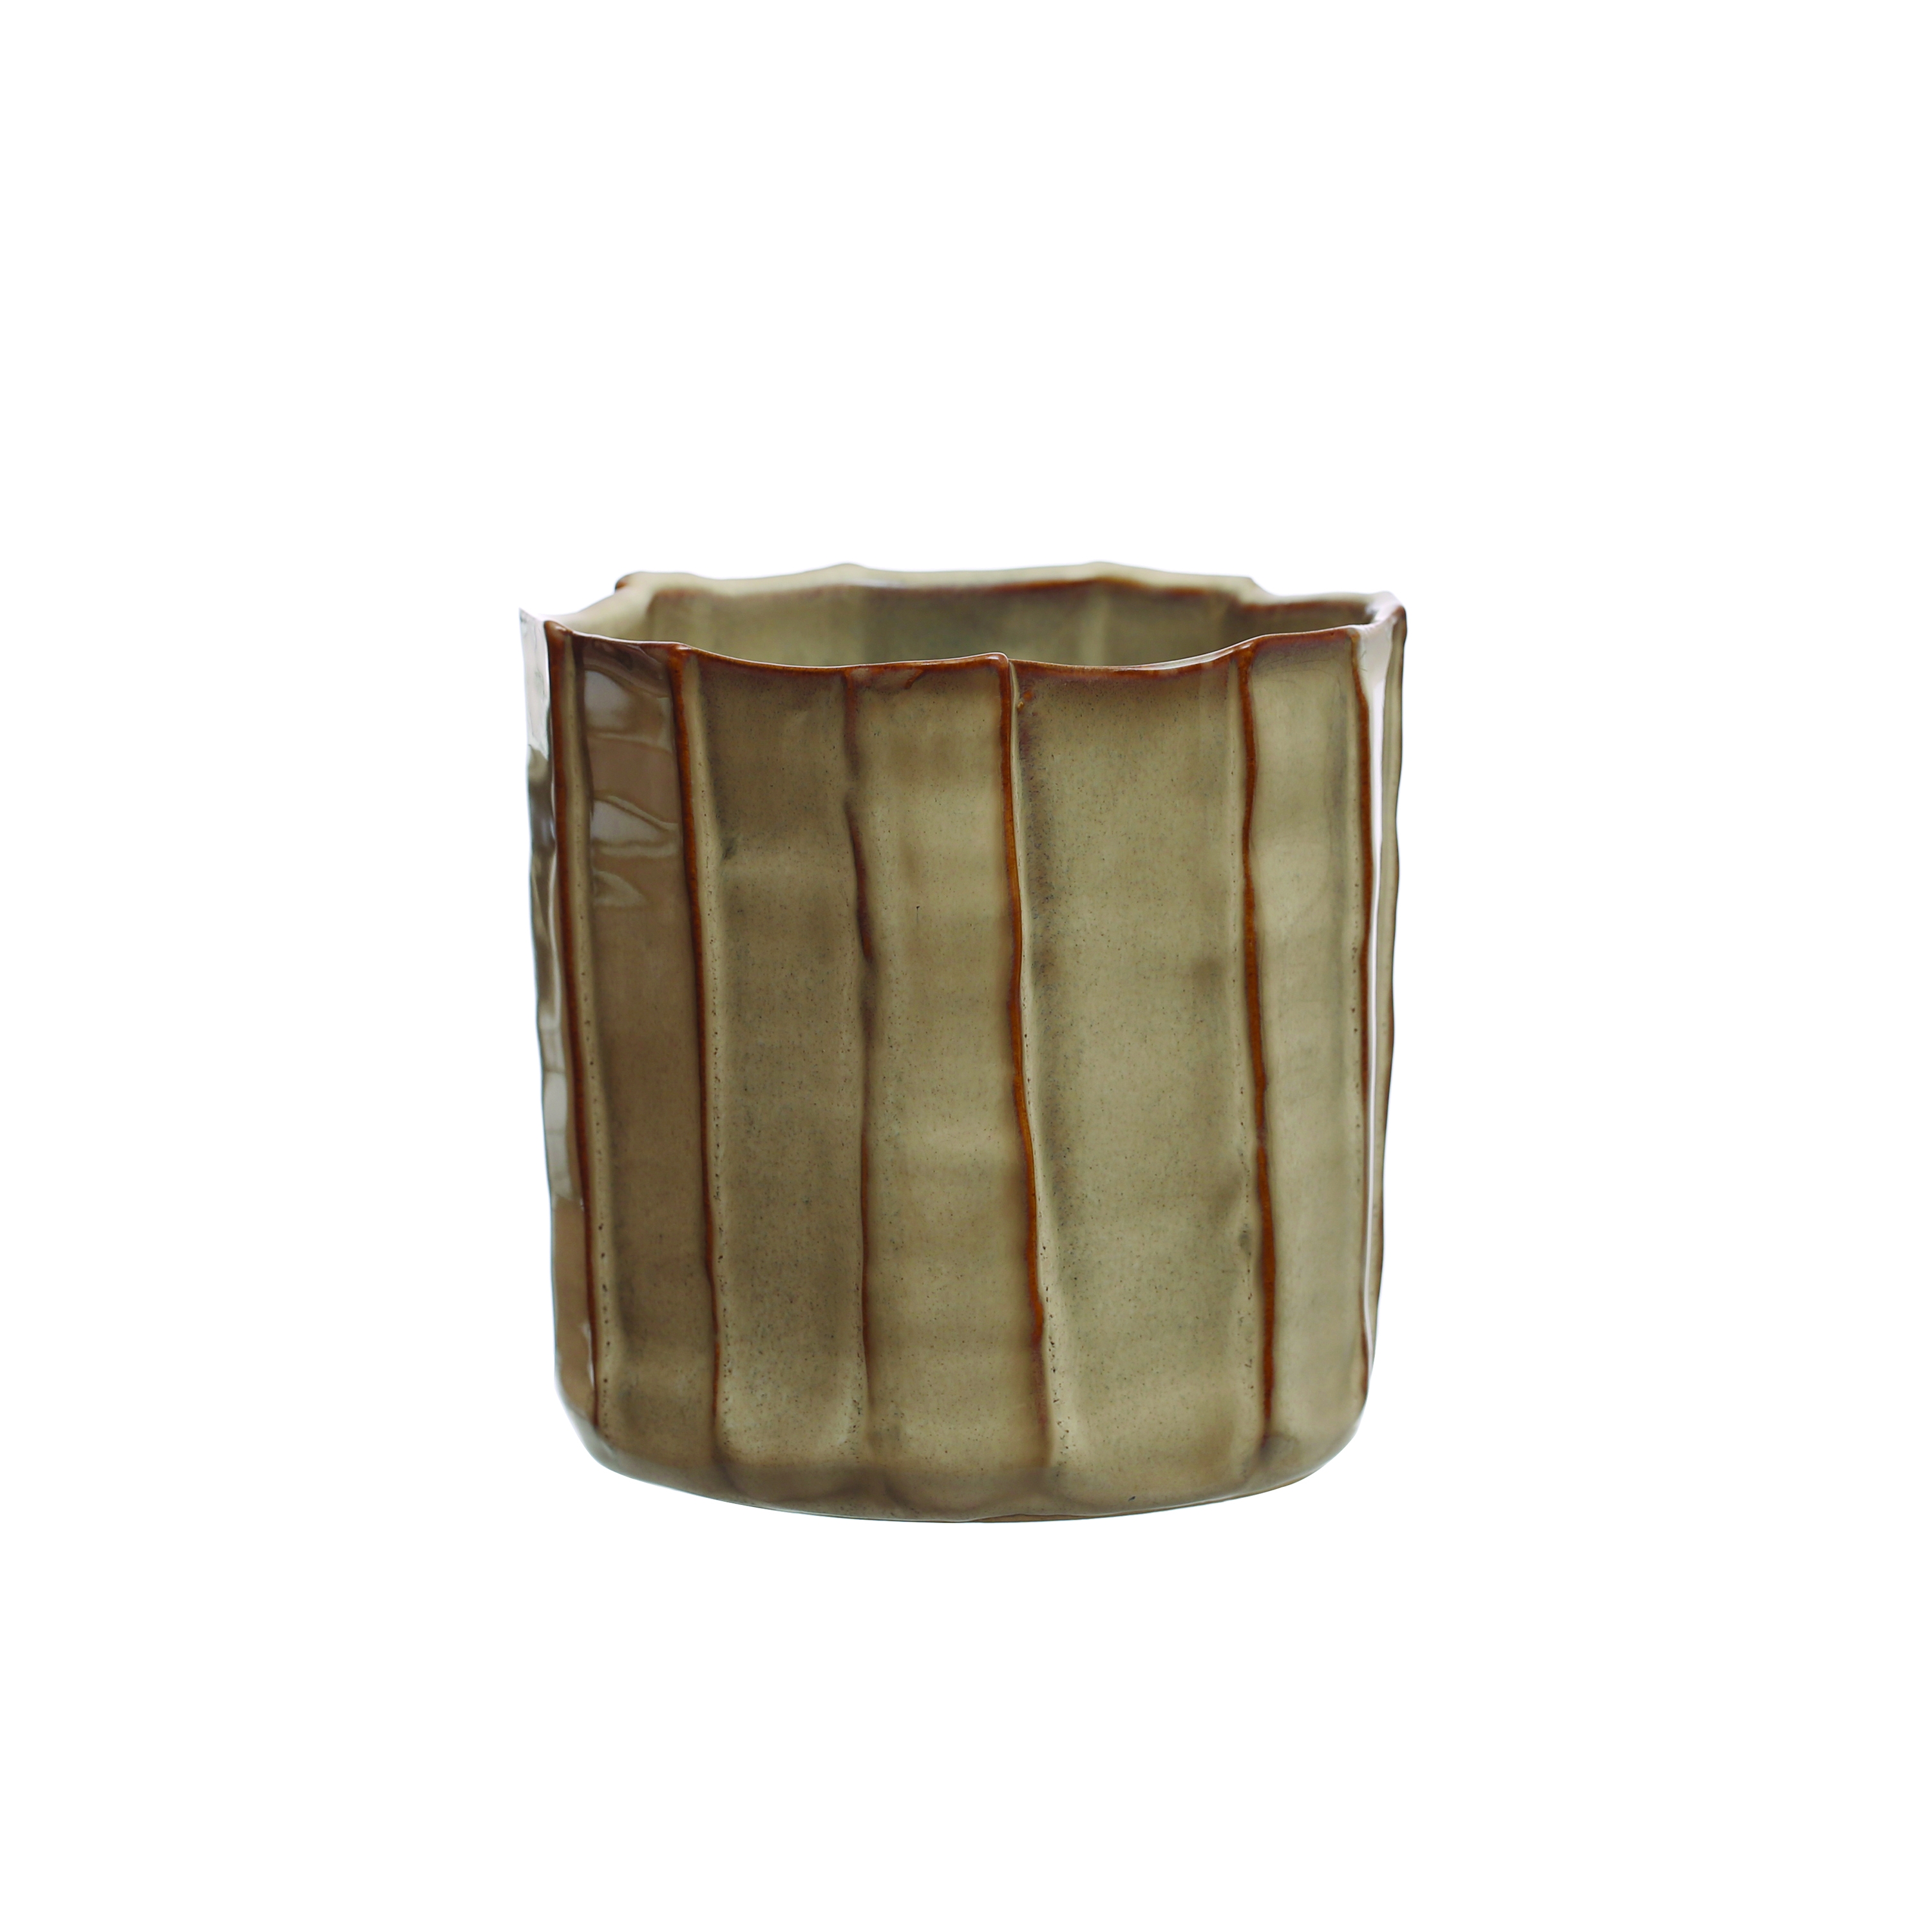 5.5 Inches Round Stoneware Pleated Planter with Reactive Glaze, Holds 4 Inches Pot, Cream - Image 0